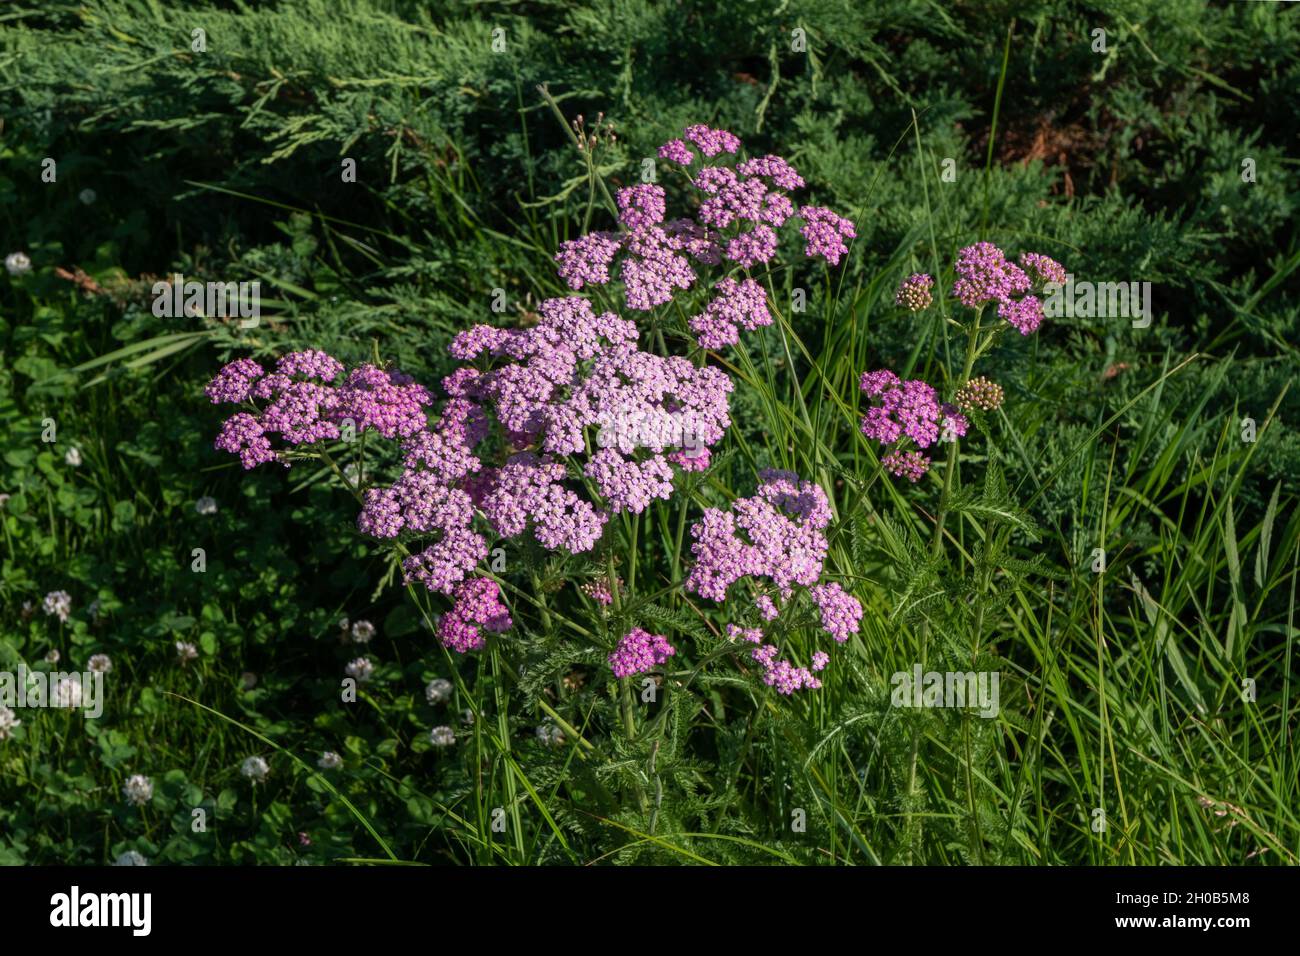 Yarrow (Achillea millefolium) Cerise Queen grows on the lawn among the grass on a summer day. Stock Photo